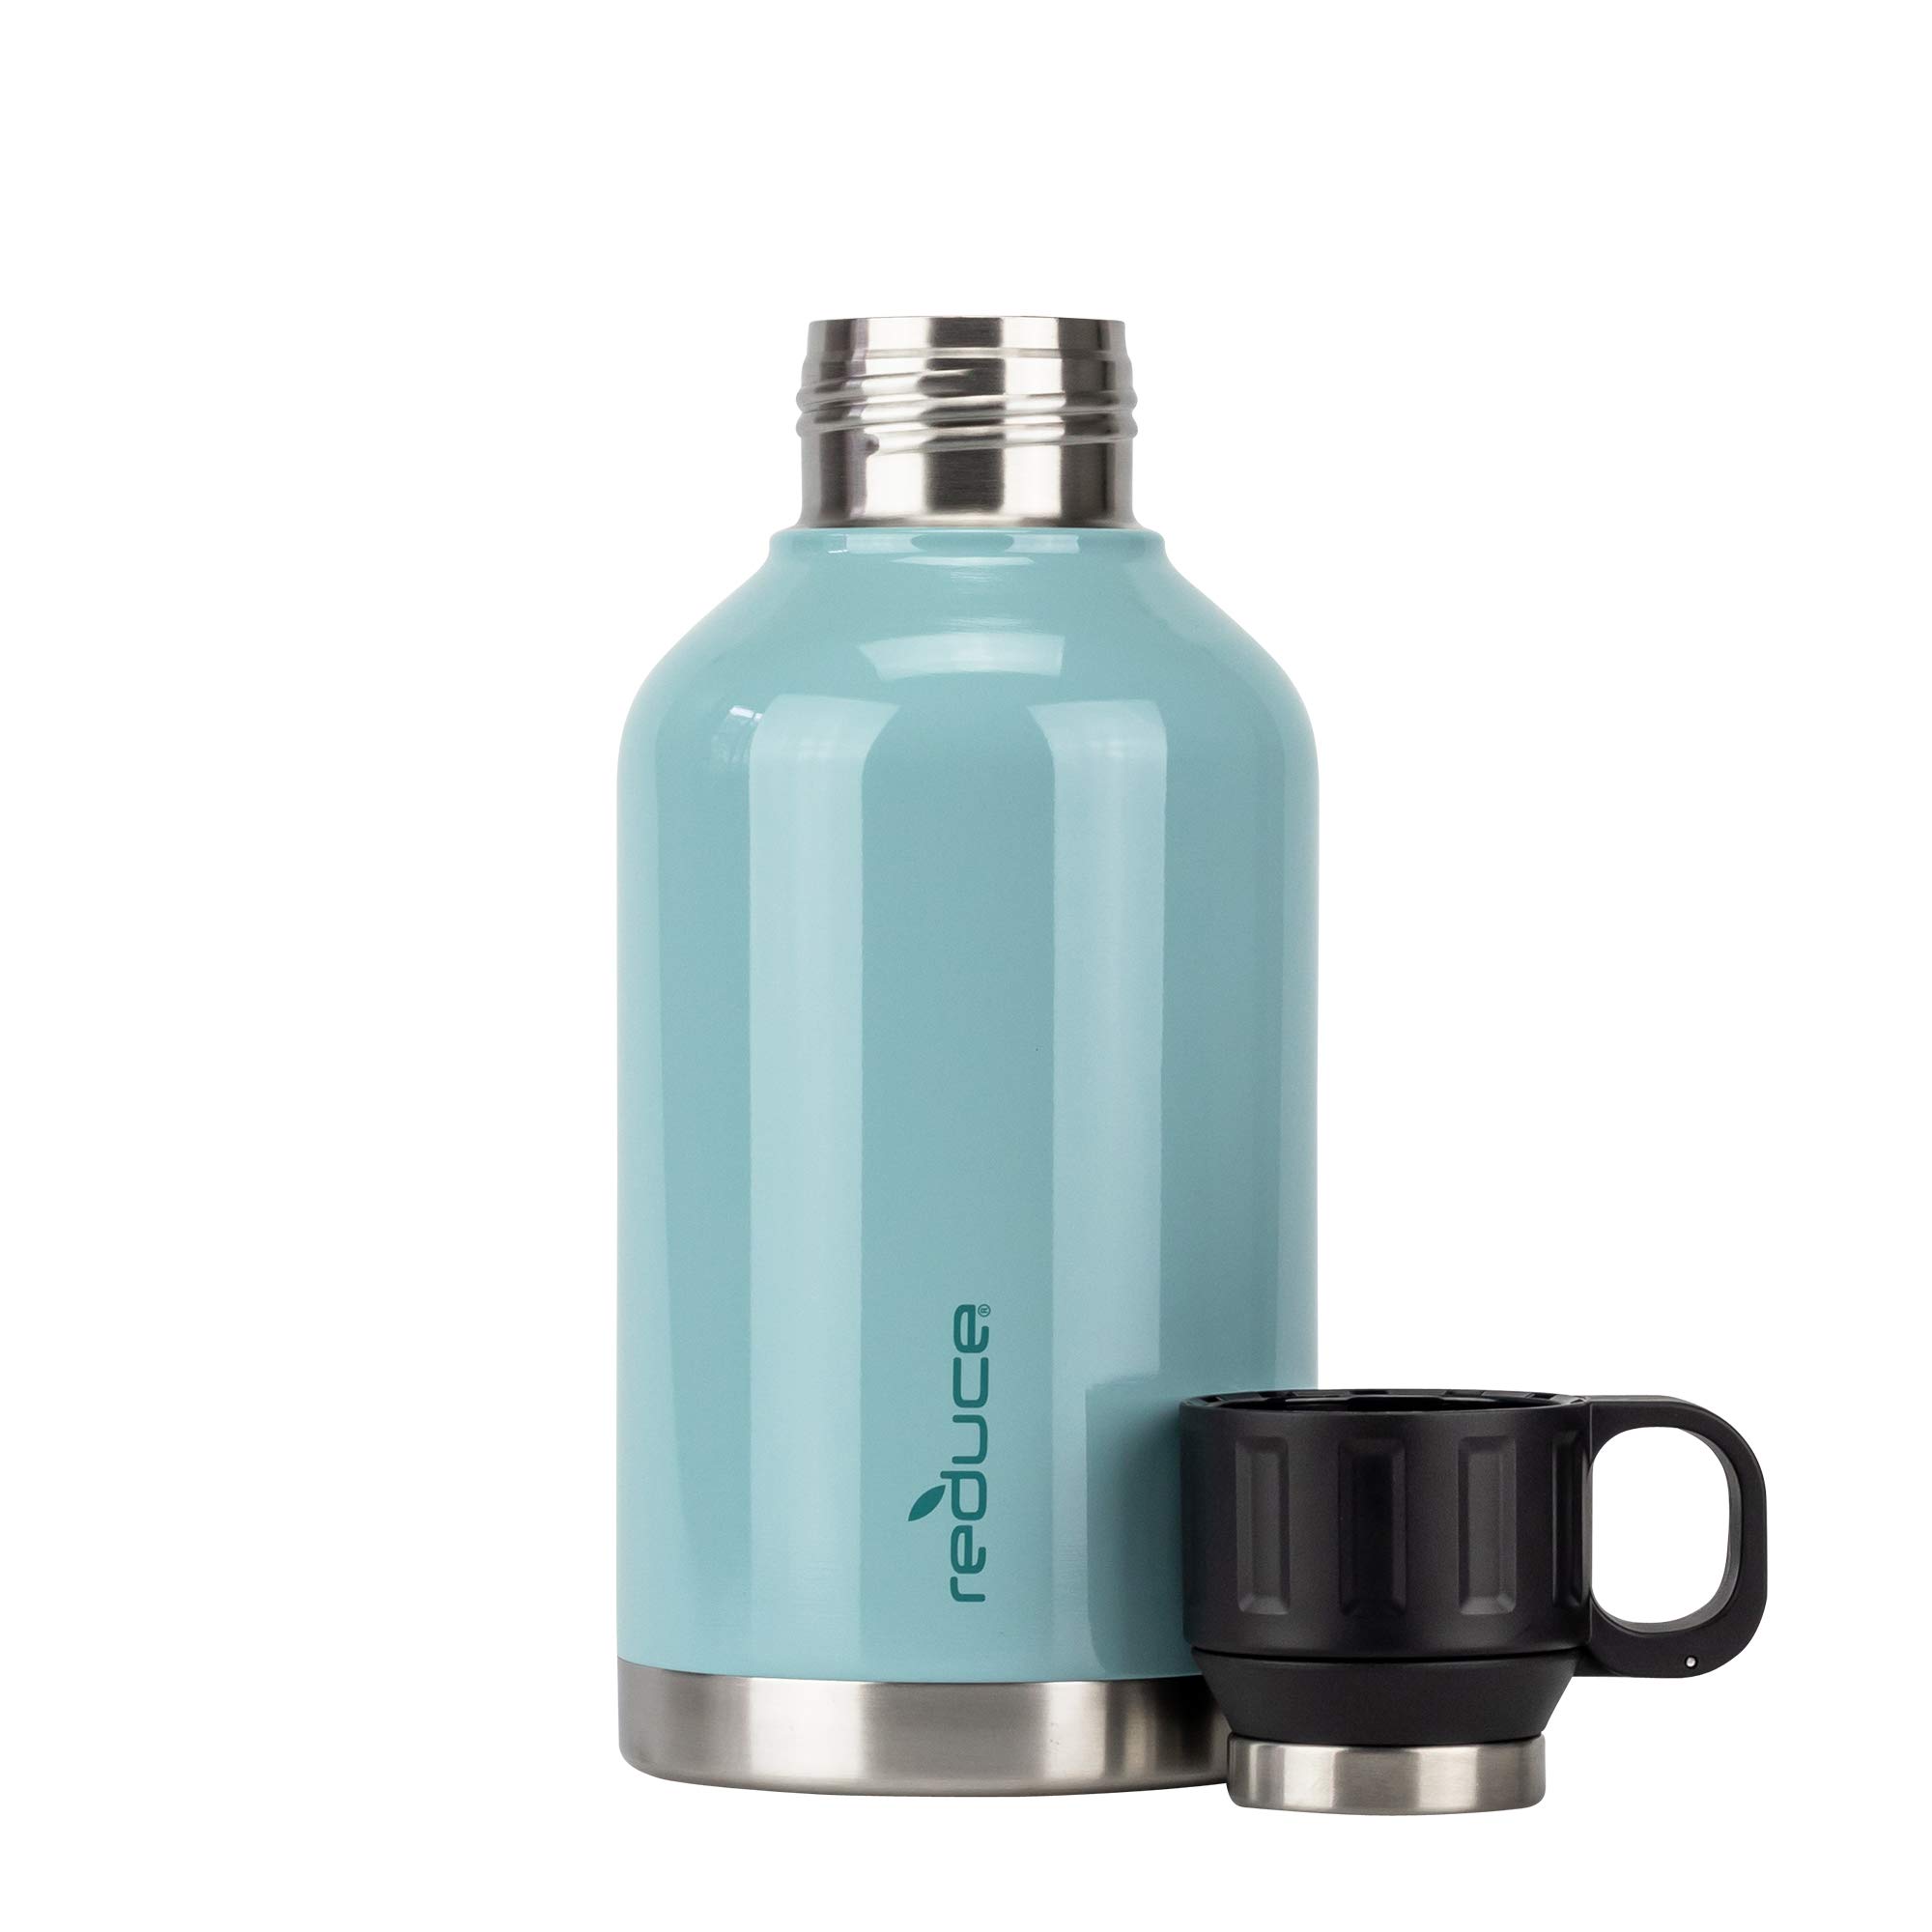 Reduce Insulated Growler, 64 oz - Up to 60 Hours Cold - Vacuum Insulated, Large Capacity for Any Adventure - Dual Opening Leak-Proof Lid, Doubles as a Cup - Eucalyptus, Opaque Gloss